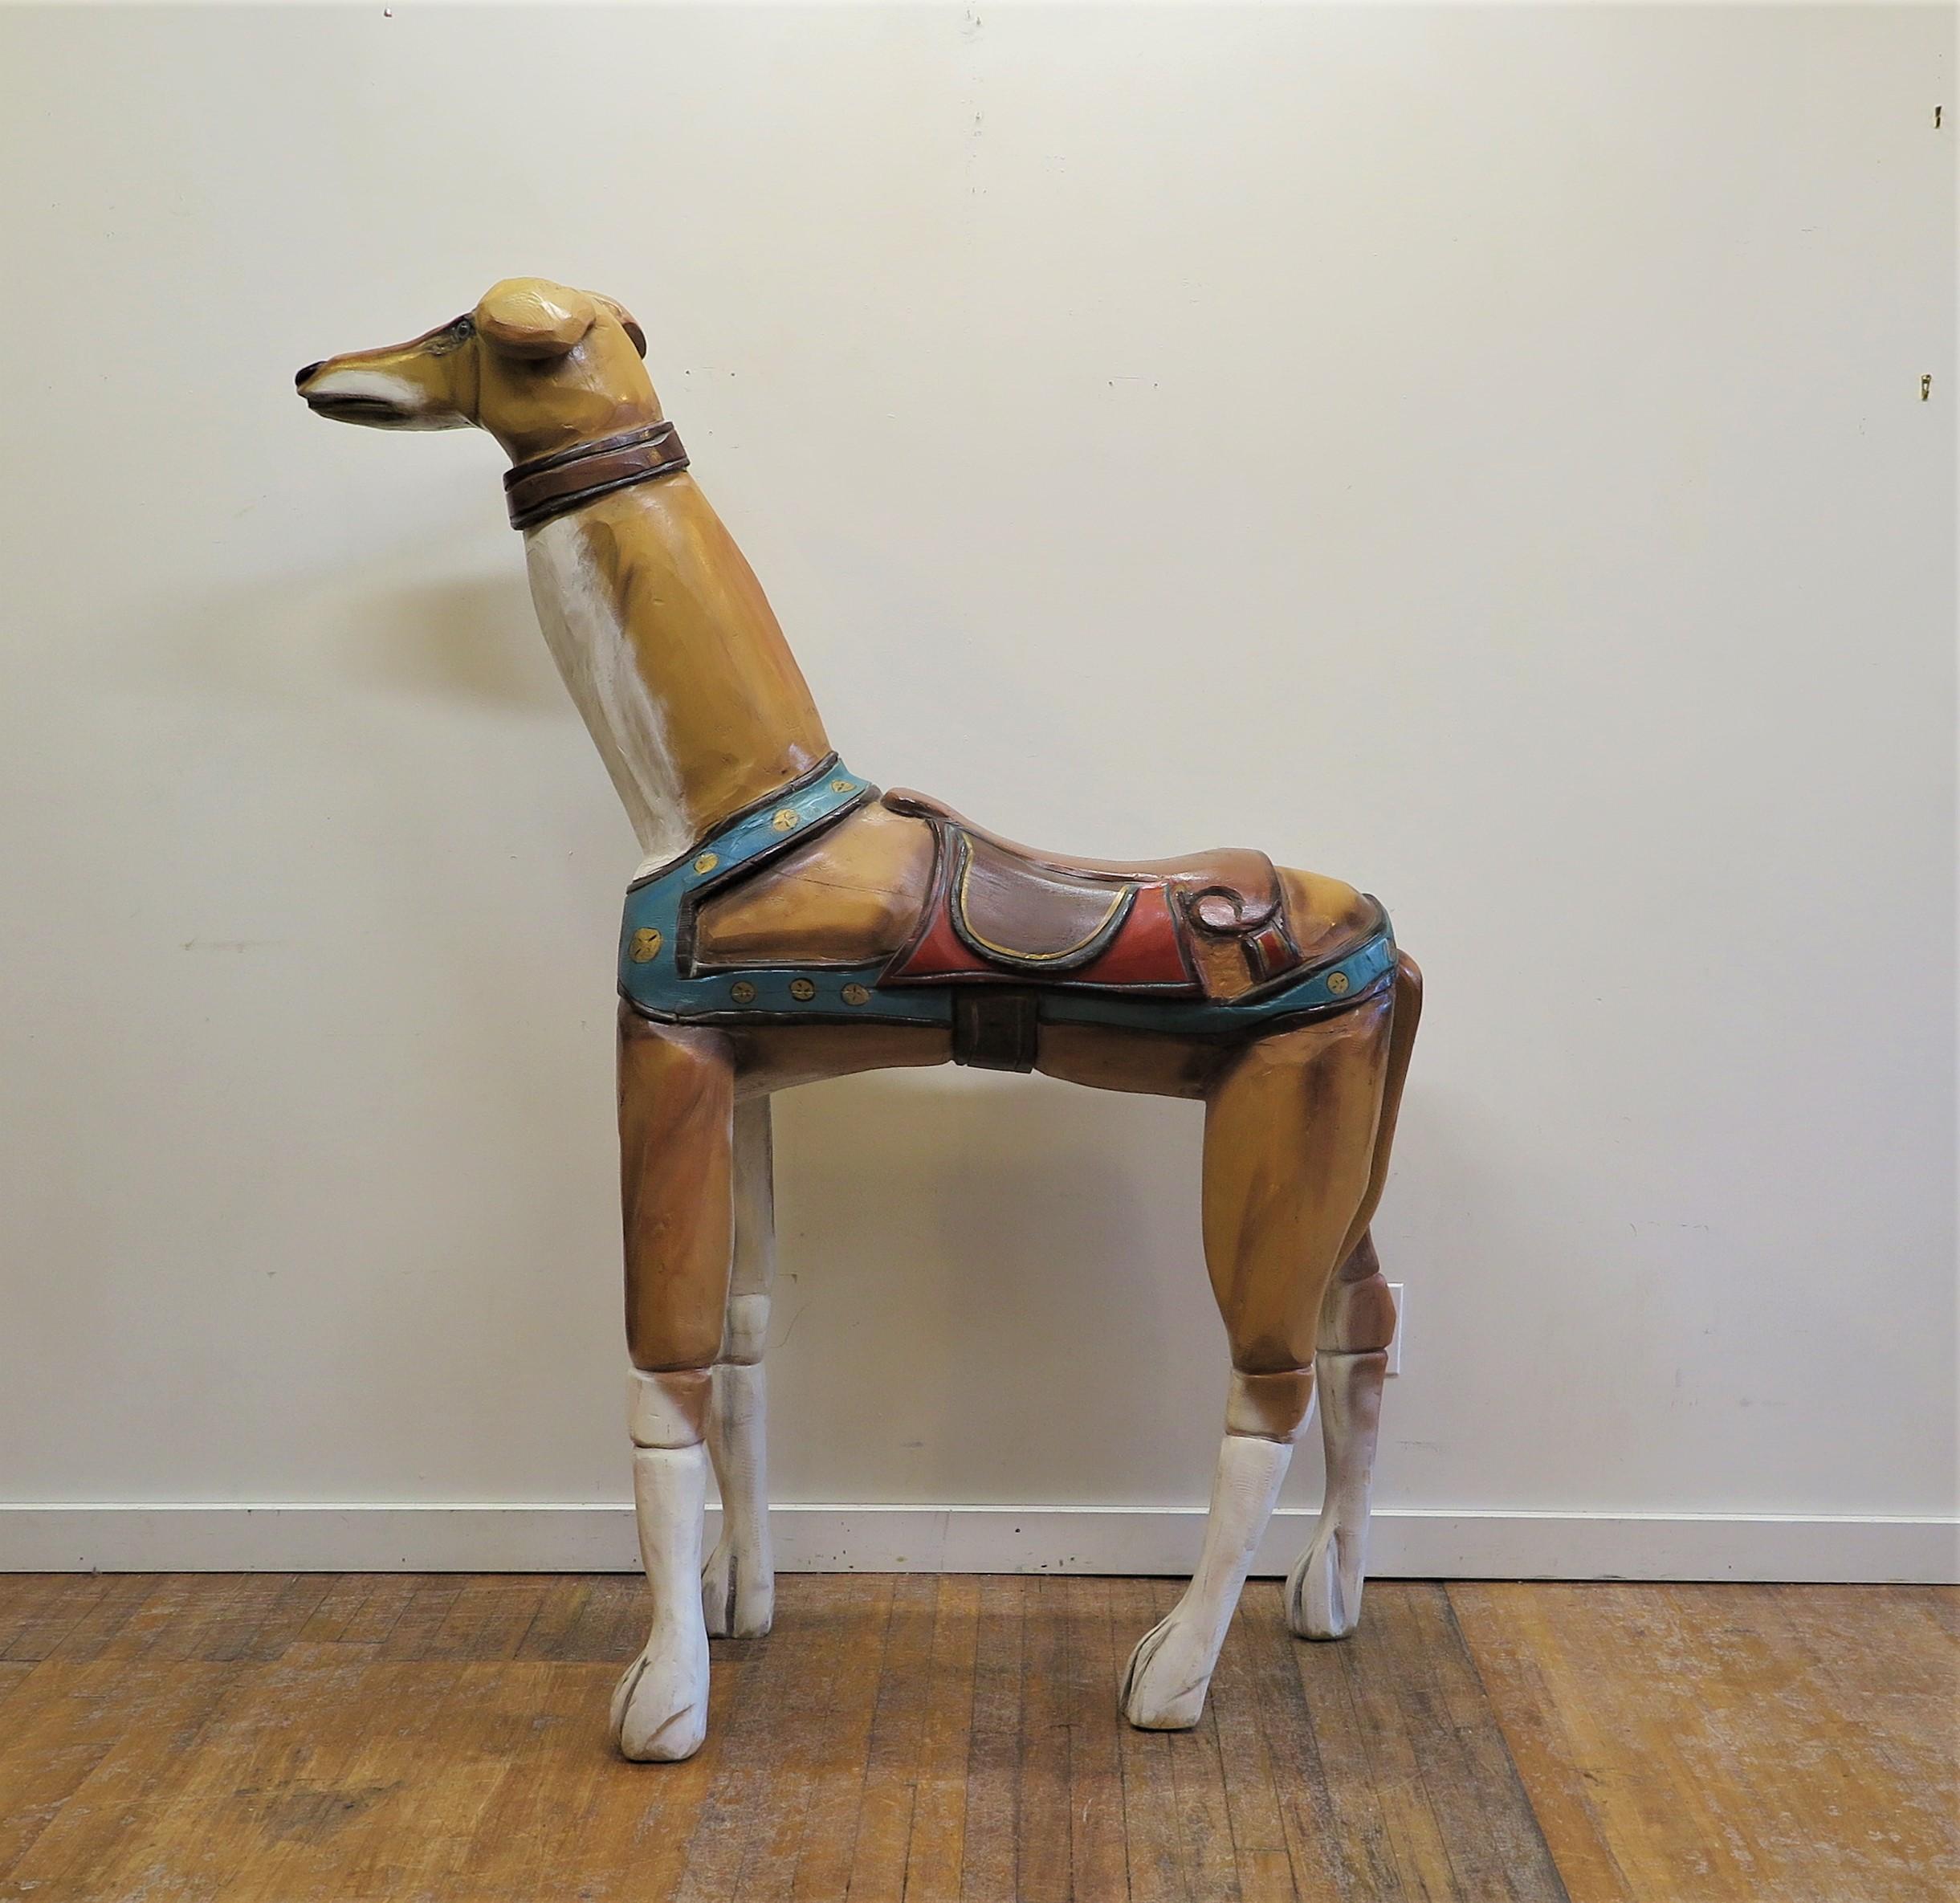 Dog Folk Art sculpture. A life size dog carved out of wood painted, saddled and ready to ride having glass eyes. Whimsical colorful large dog carving depicting a dog saddled for riding. American vintage wood carving sculpture from a grand house